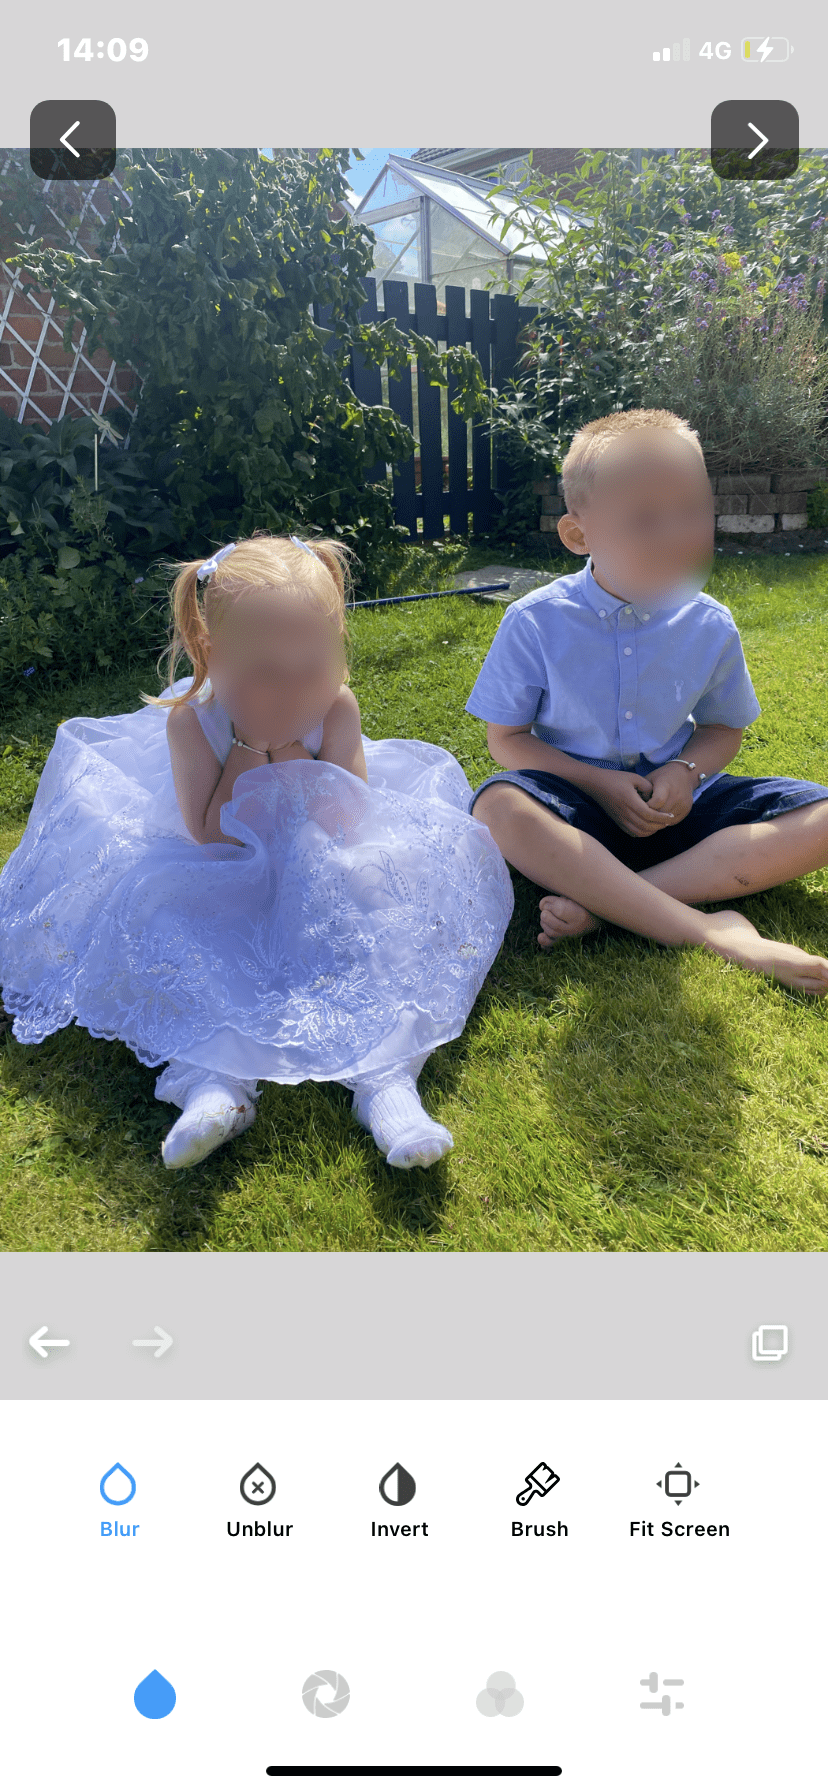 image of childrens face blurred